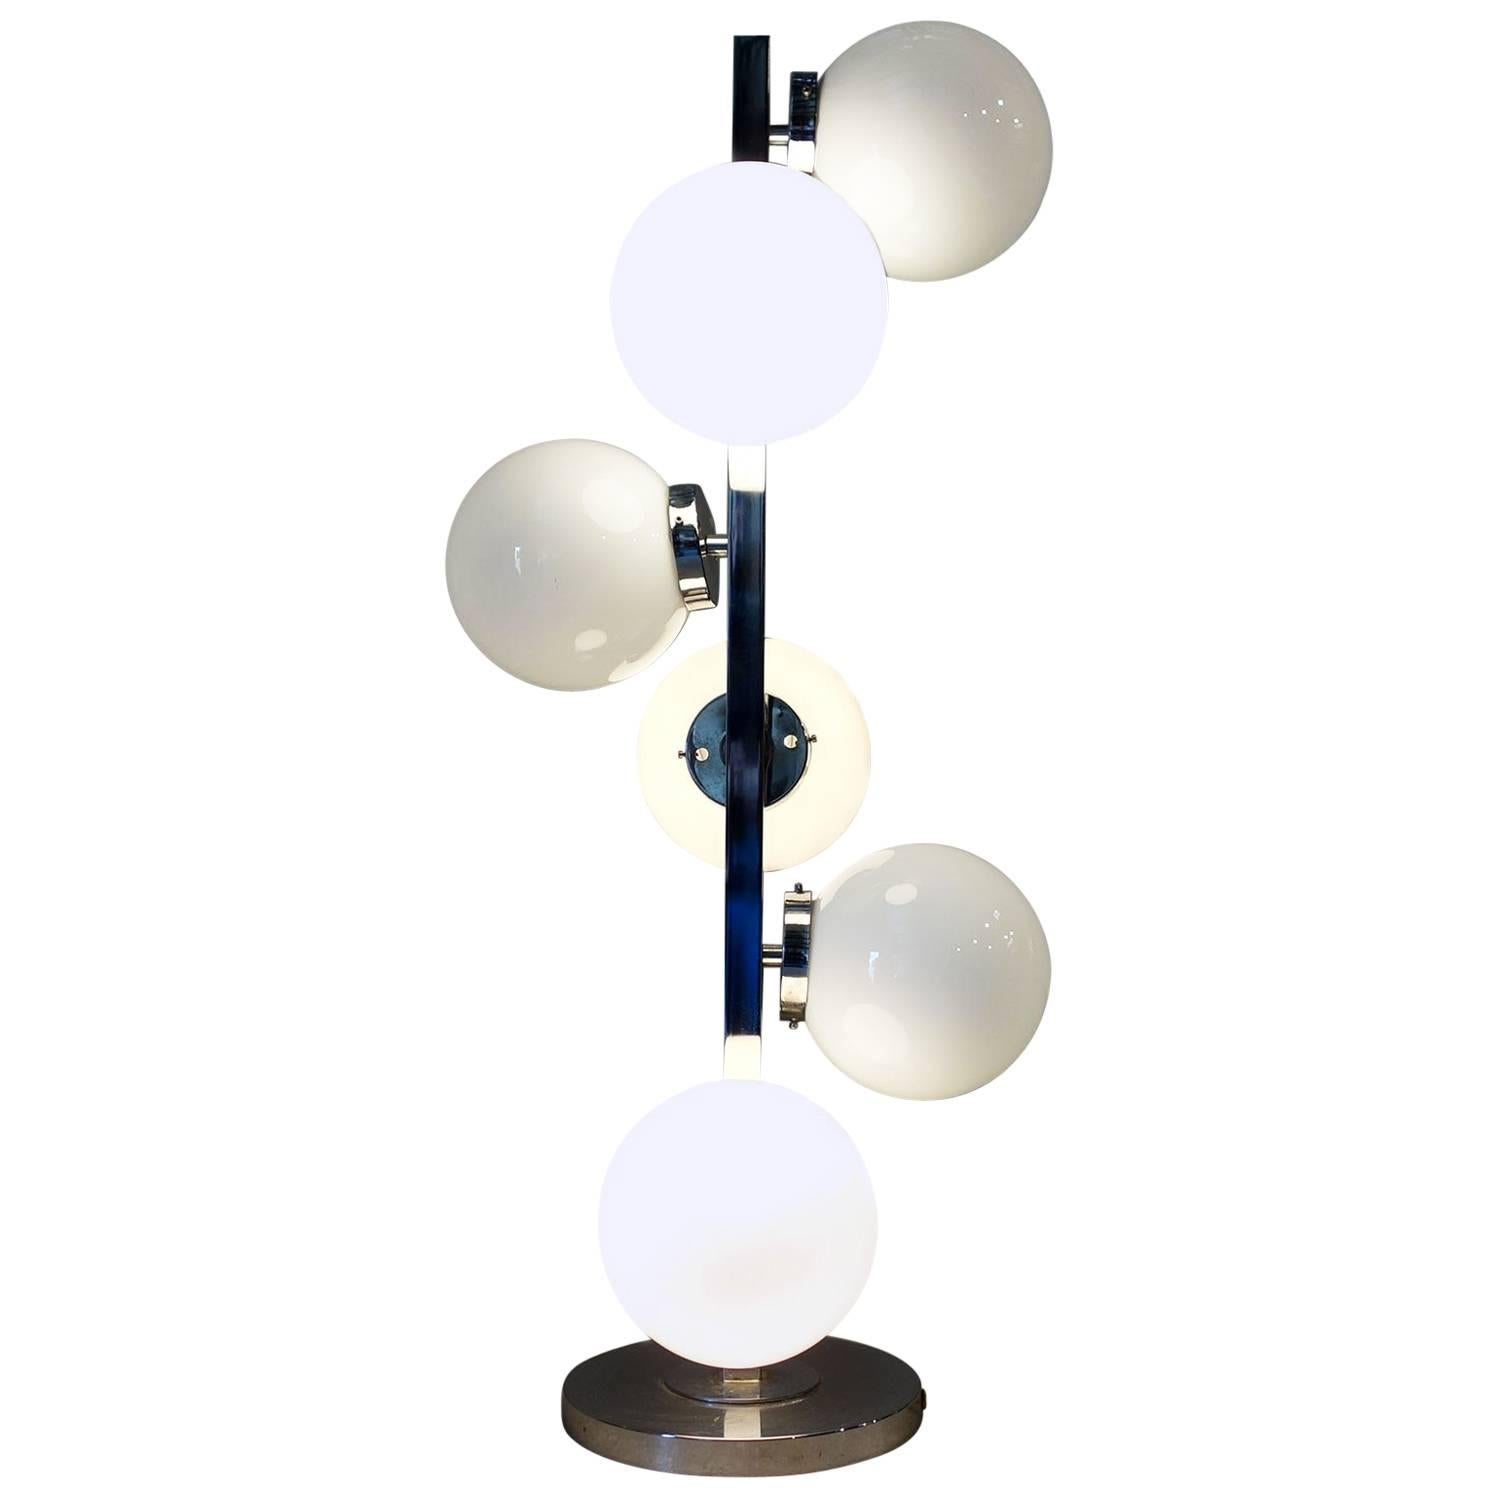 Italian Floor Lamp from the 1970s, Attributed to VeArt